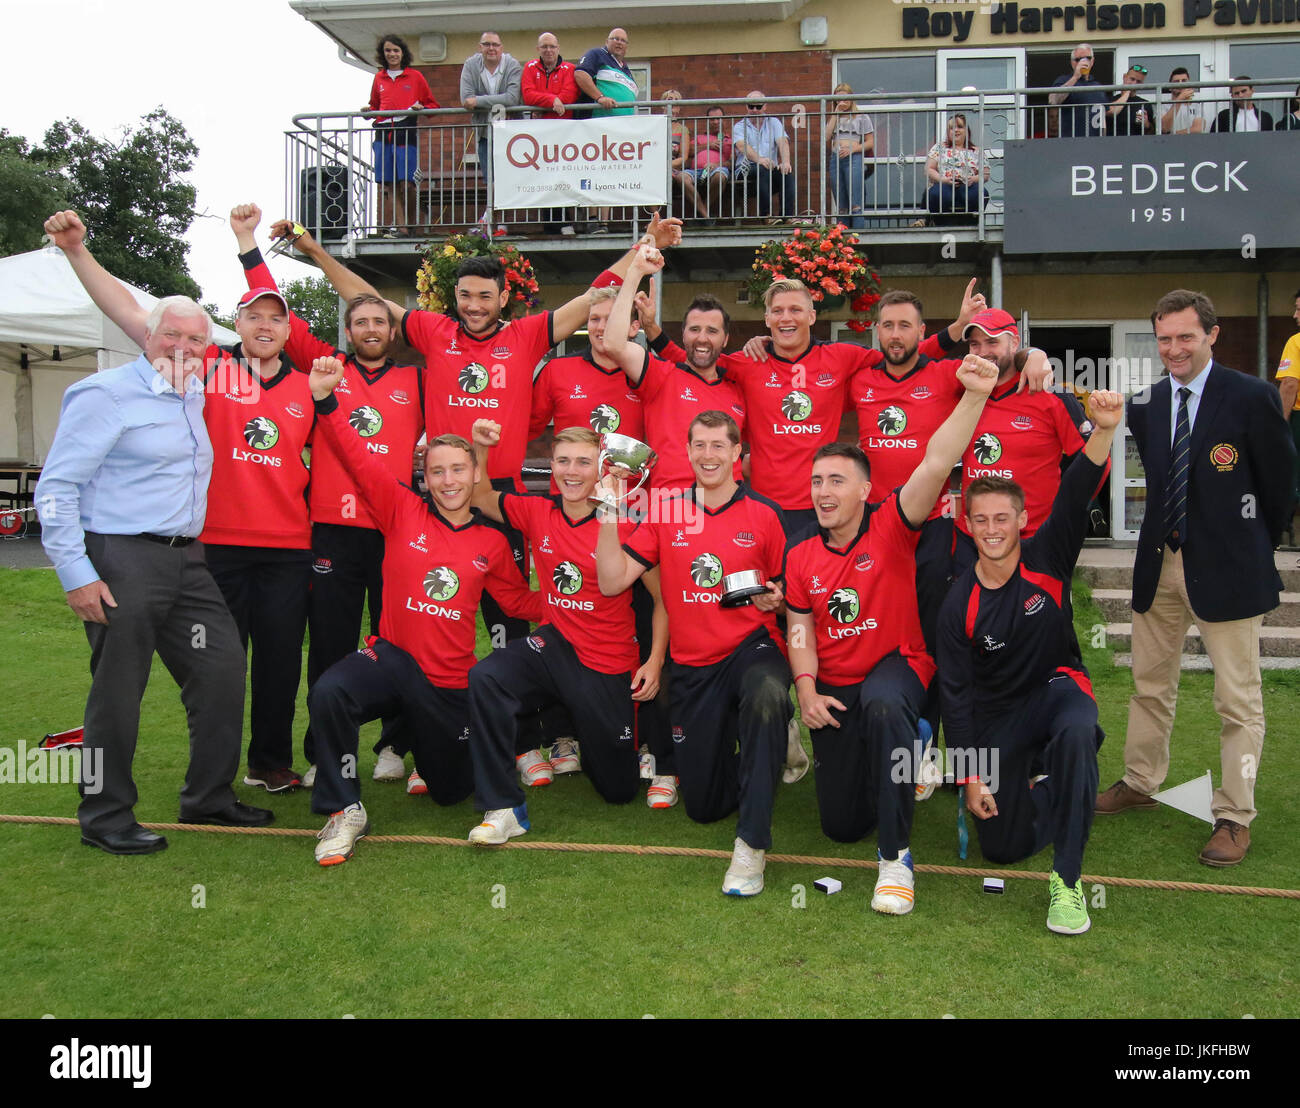 The Lawn, Waringstown, Northern Ireland, UK. 23rd July, 2017. The Lagan Valley Steels Twenty 20 Cup Final 2017.Waringstown retained the trophy with a 26 run win over North Down in today's final. Waringstown celebrate their cup win. Credit: David Hunter/Alamy Live News Stock Photo